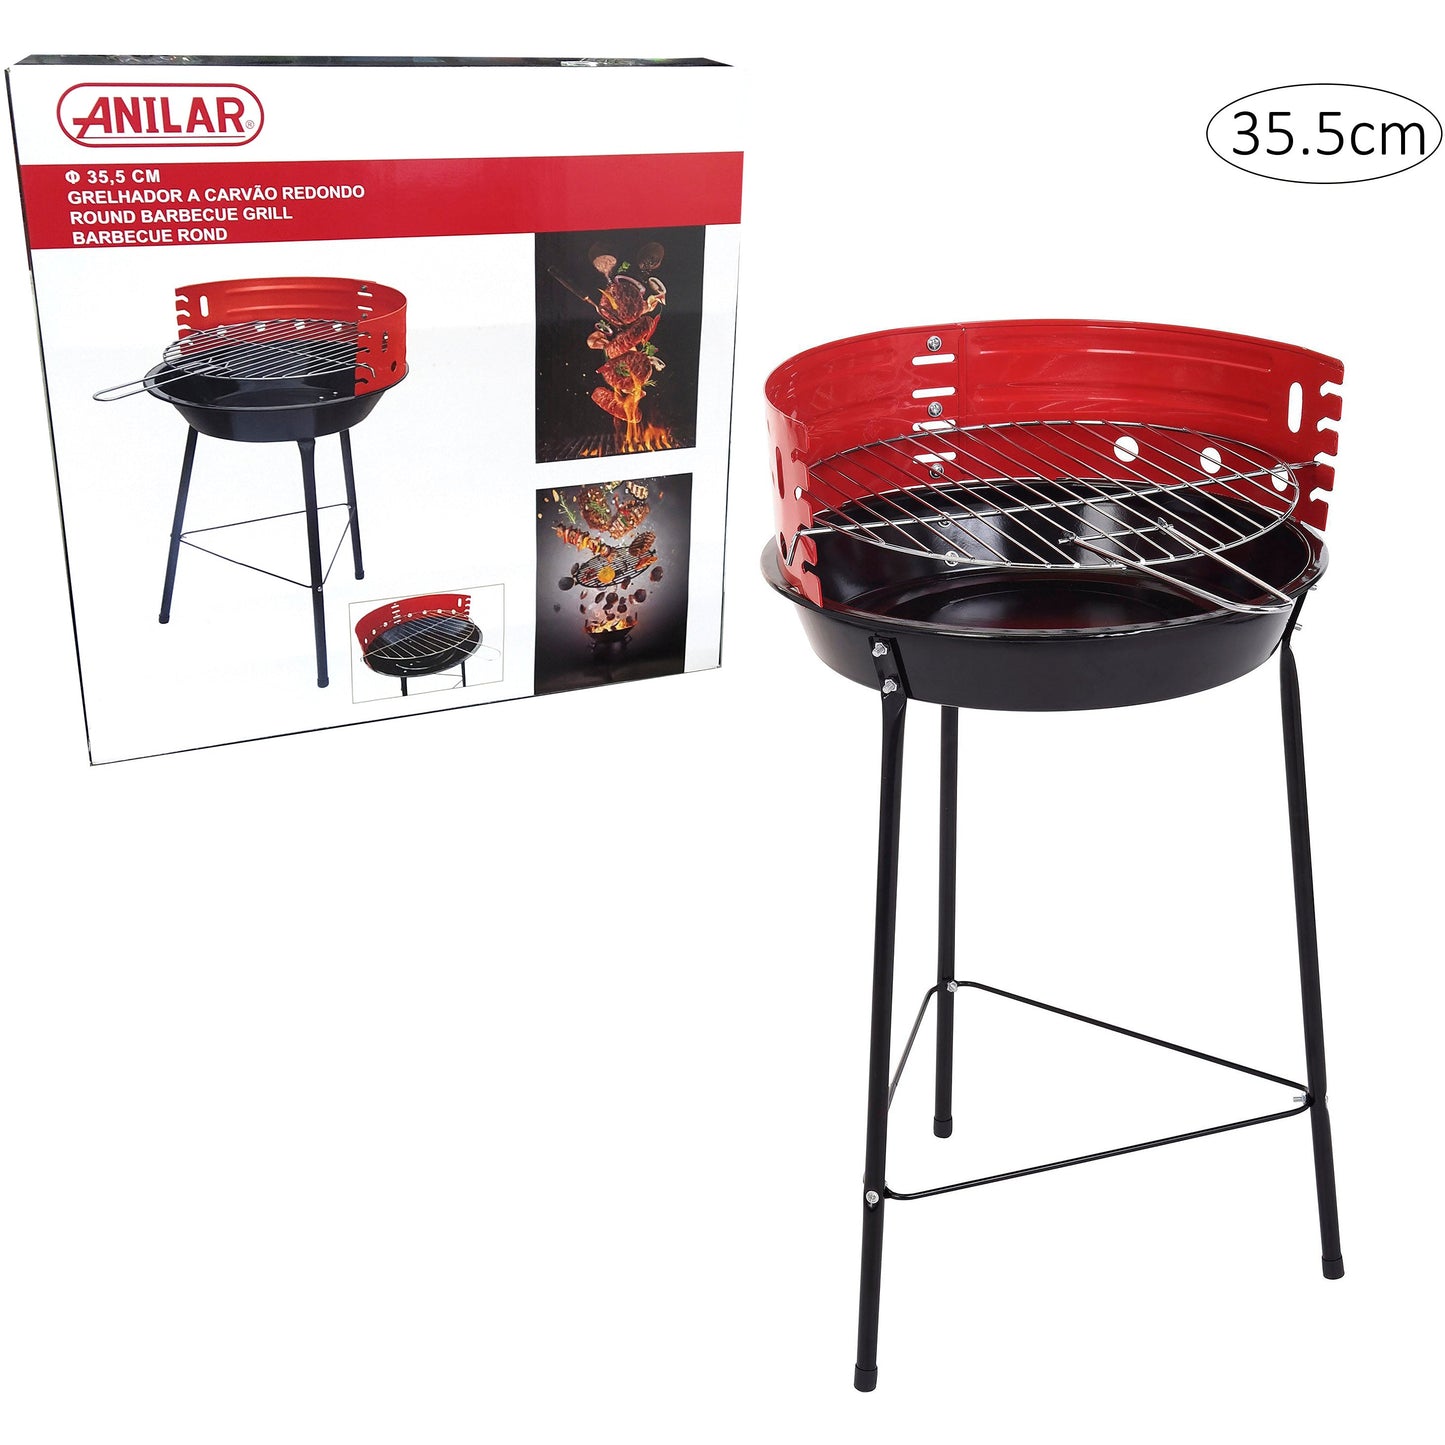 Outdoor Standing Round Charcoal Barbecue 35.5cm